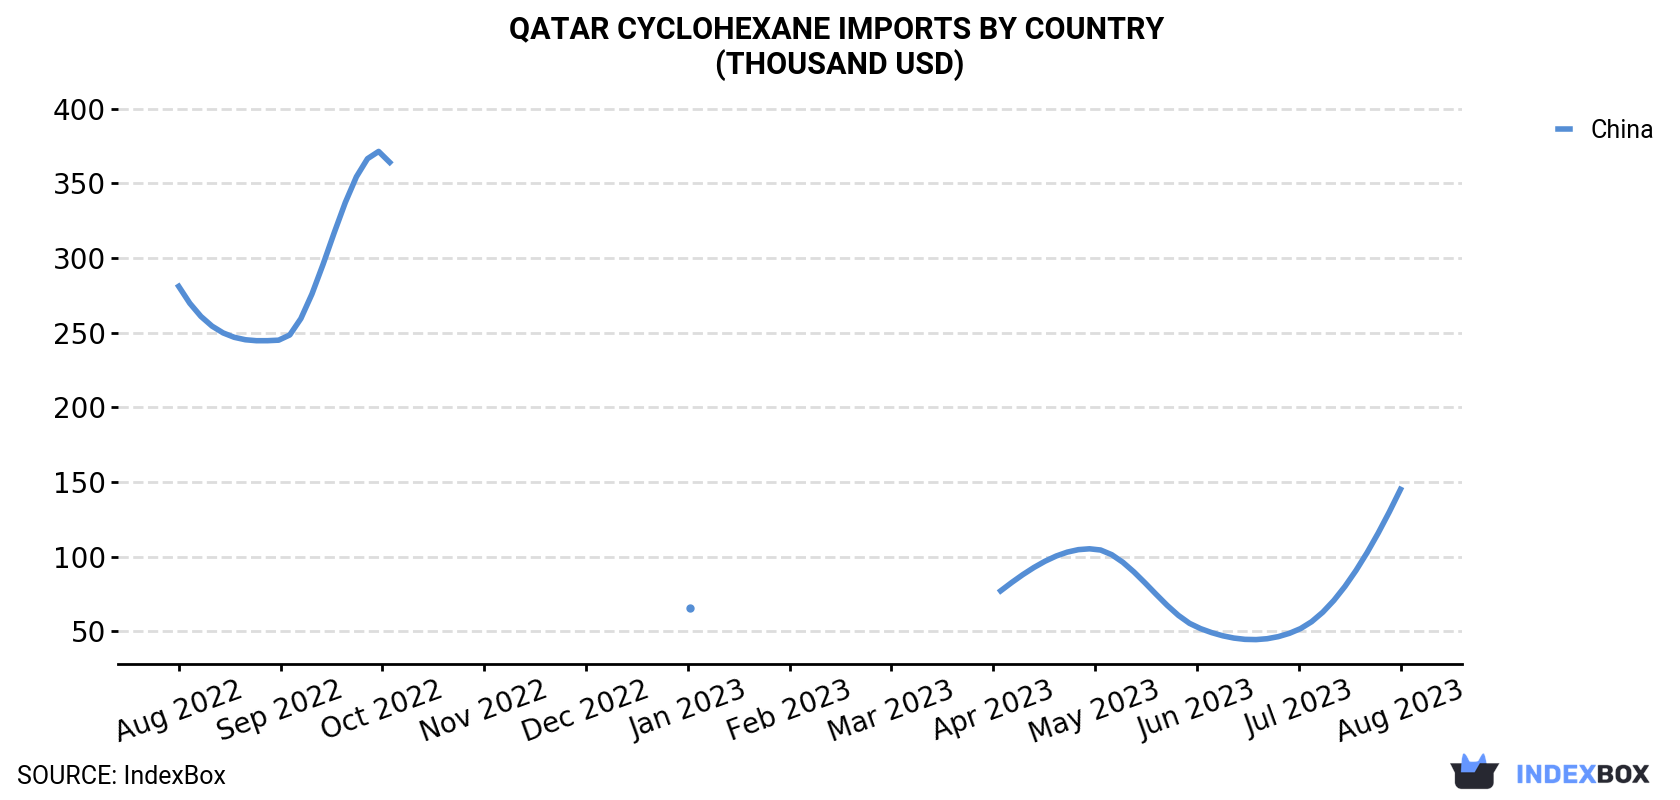 Qatar Cyclohexane Imports By Country (Thousand USD)